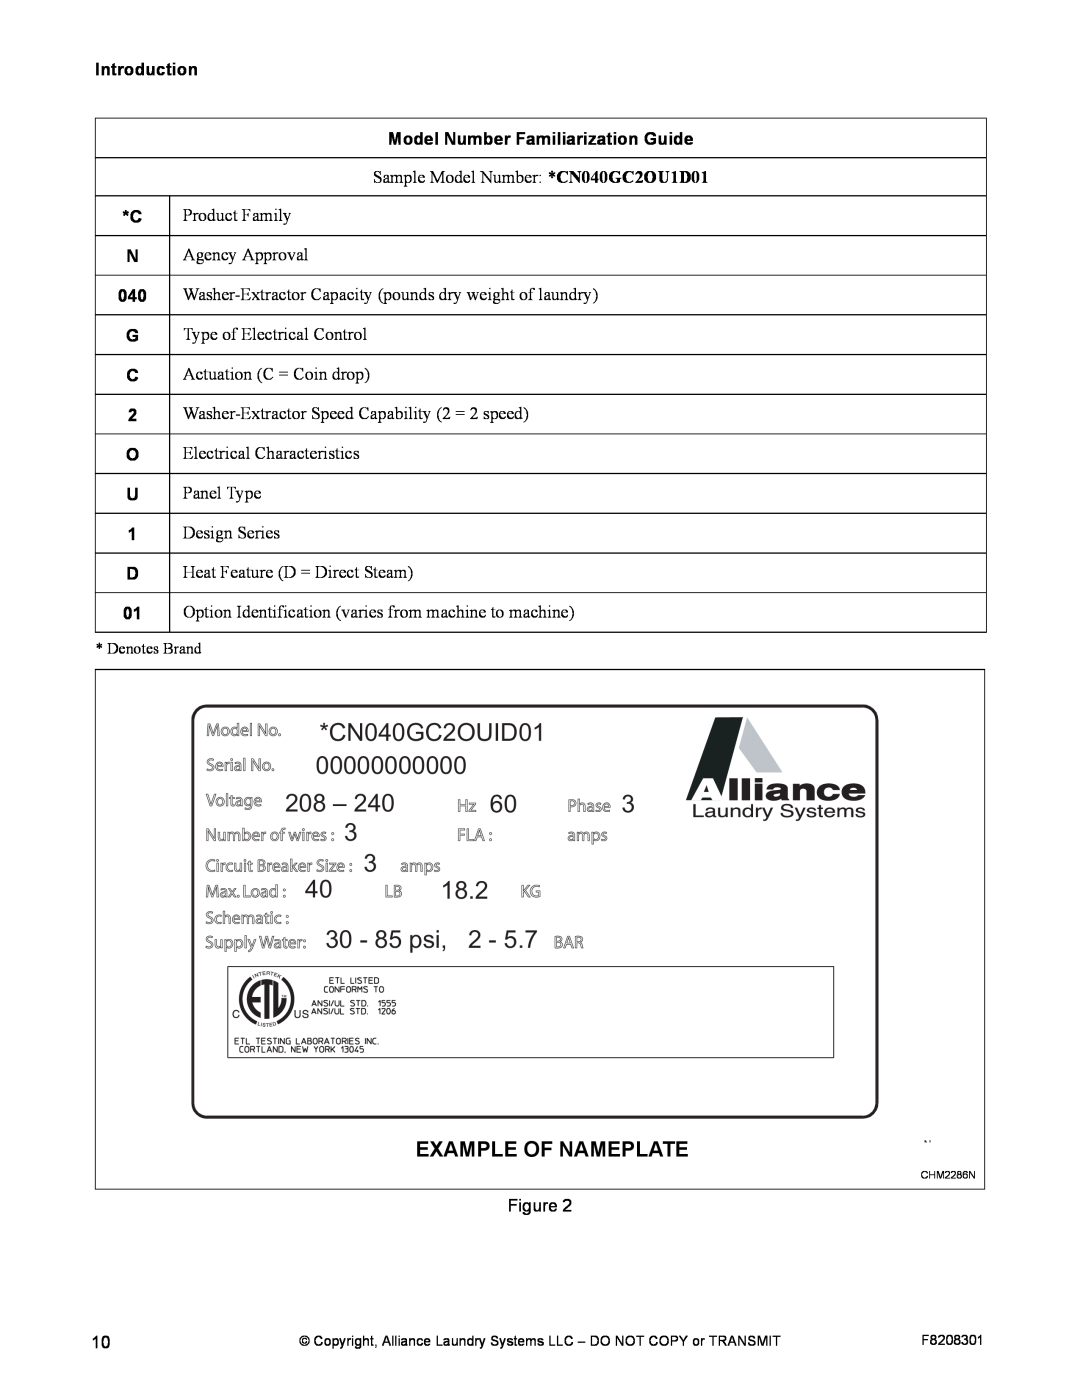 Alliance Laundry Systems CHM1772C manual Example Of Nameplate, CN040GC2OUID01, 00000000000, 18.2, Supply Water 30 - 85 psi 